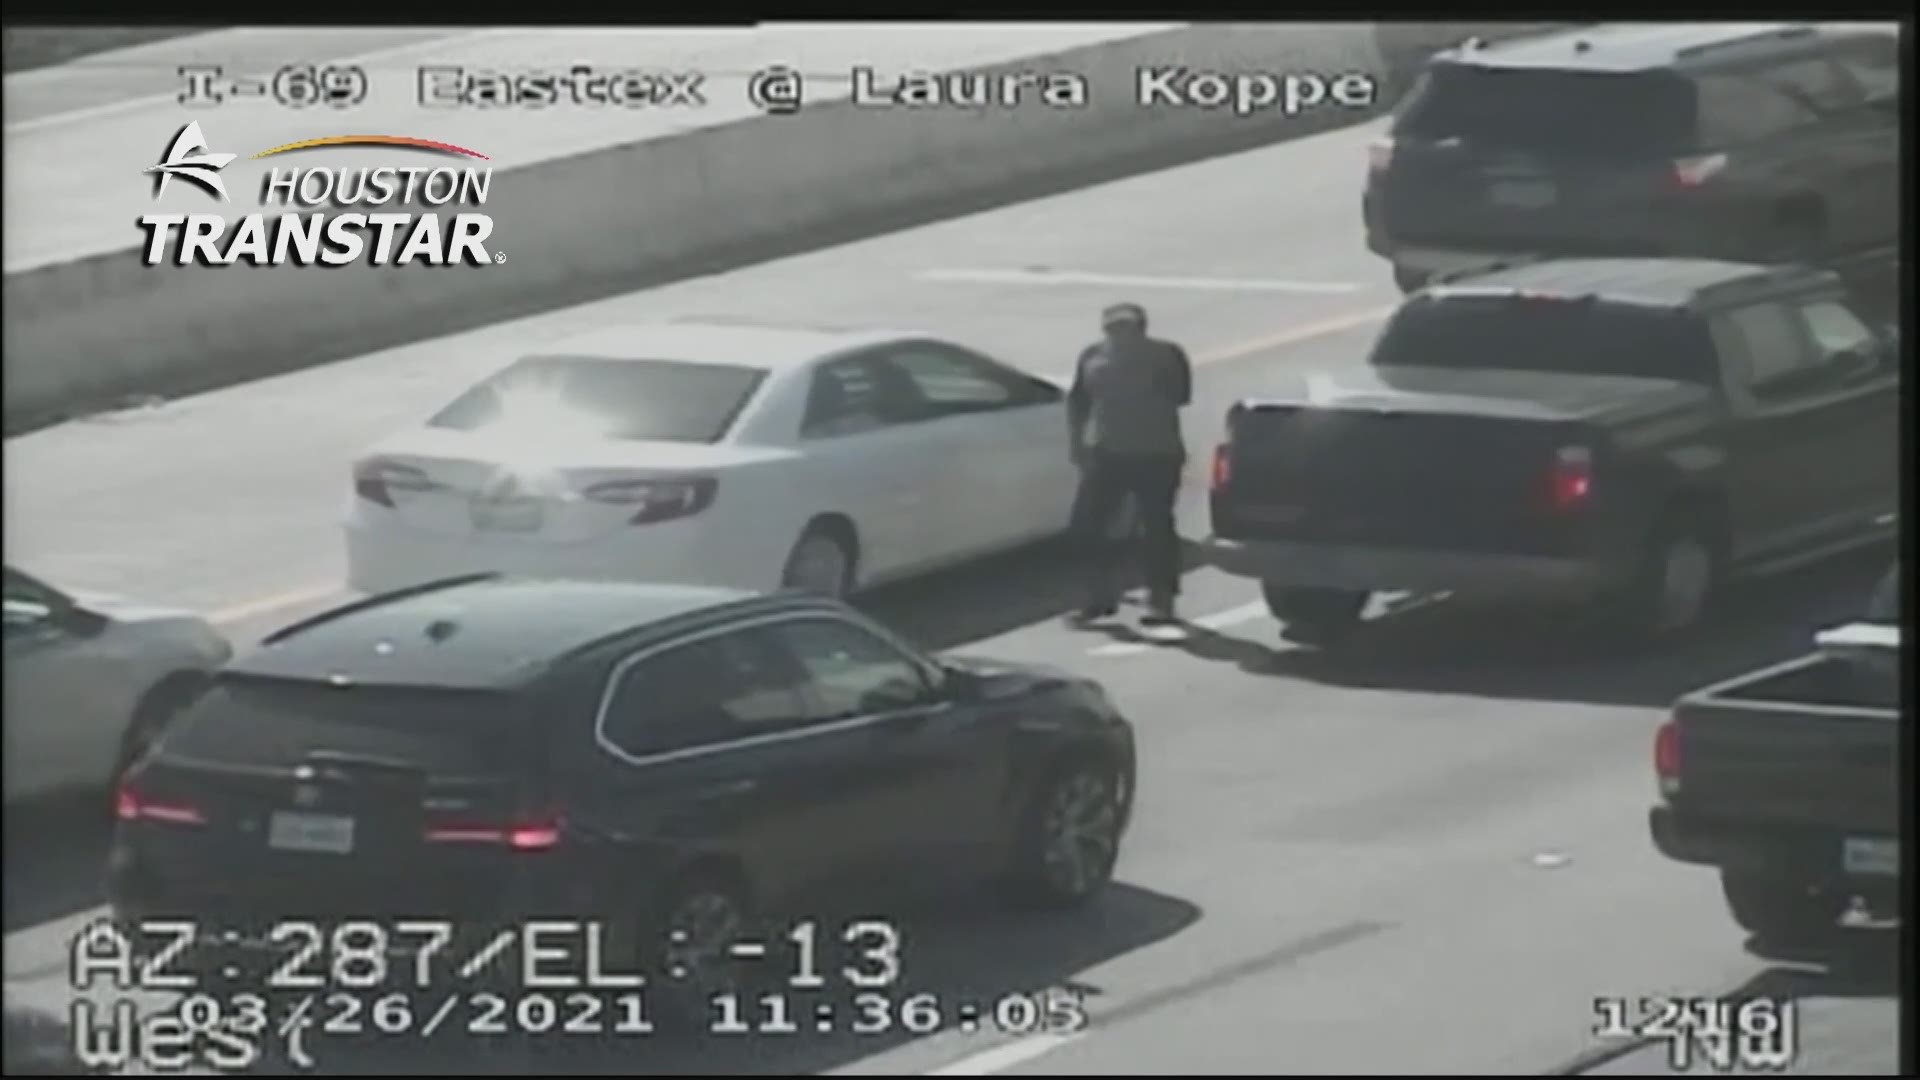 A suspected impaired driver was taken into custody after Houston police said he crashed into a METRO officer's motorcycle and another vehicle on the Eastex Freeway.